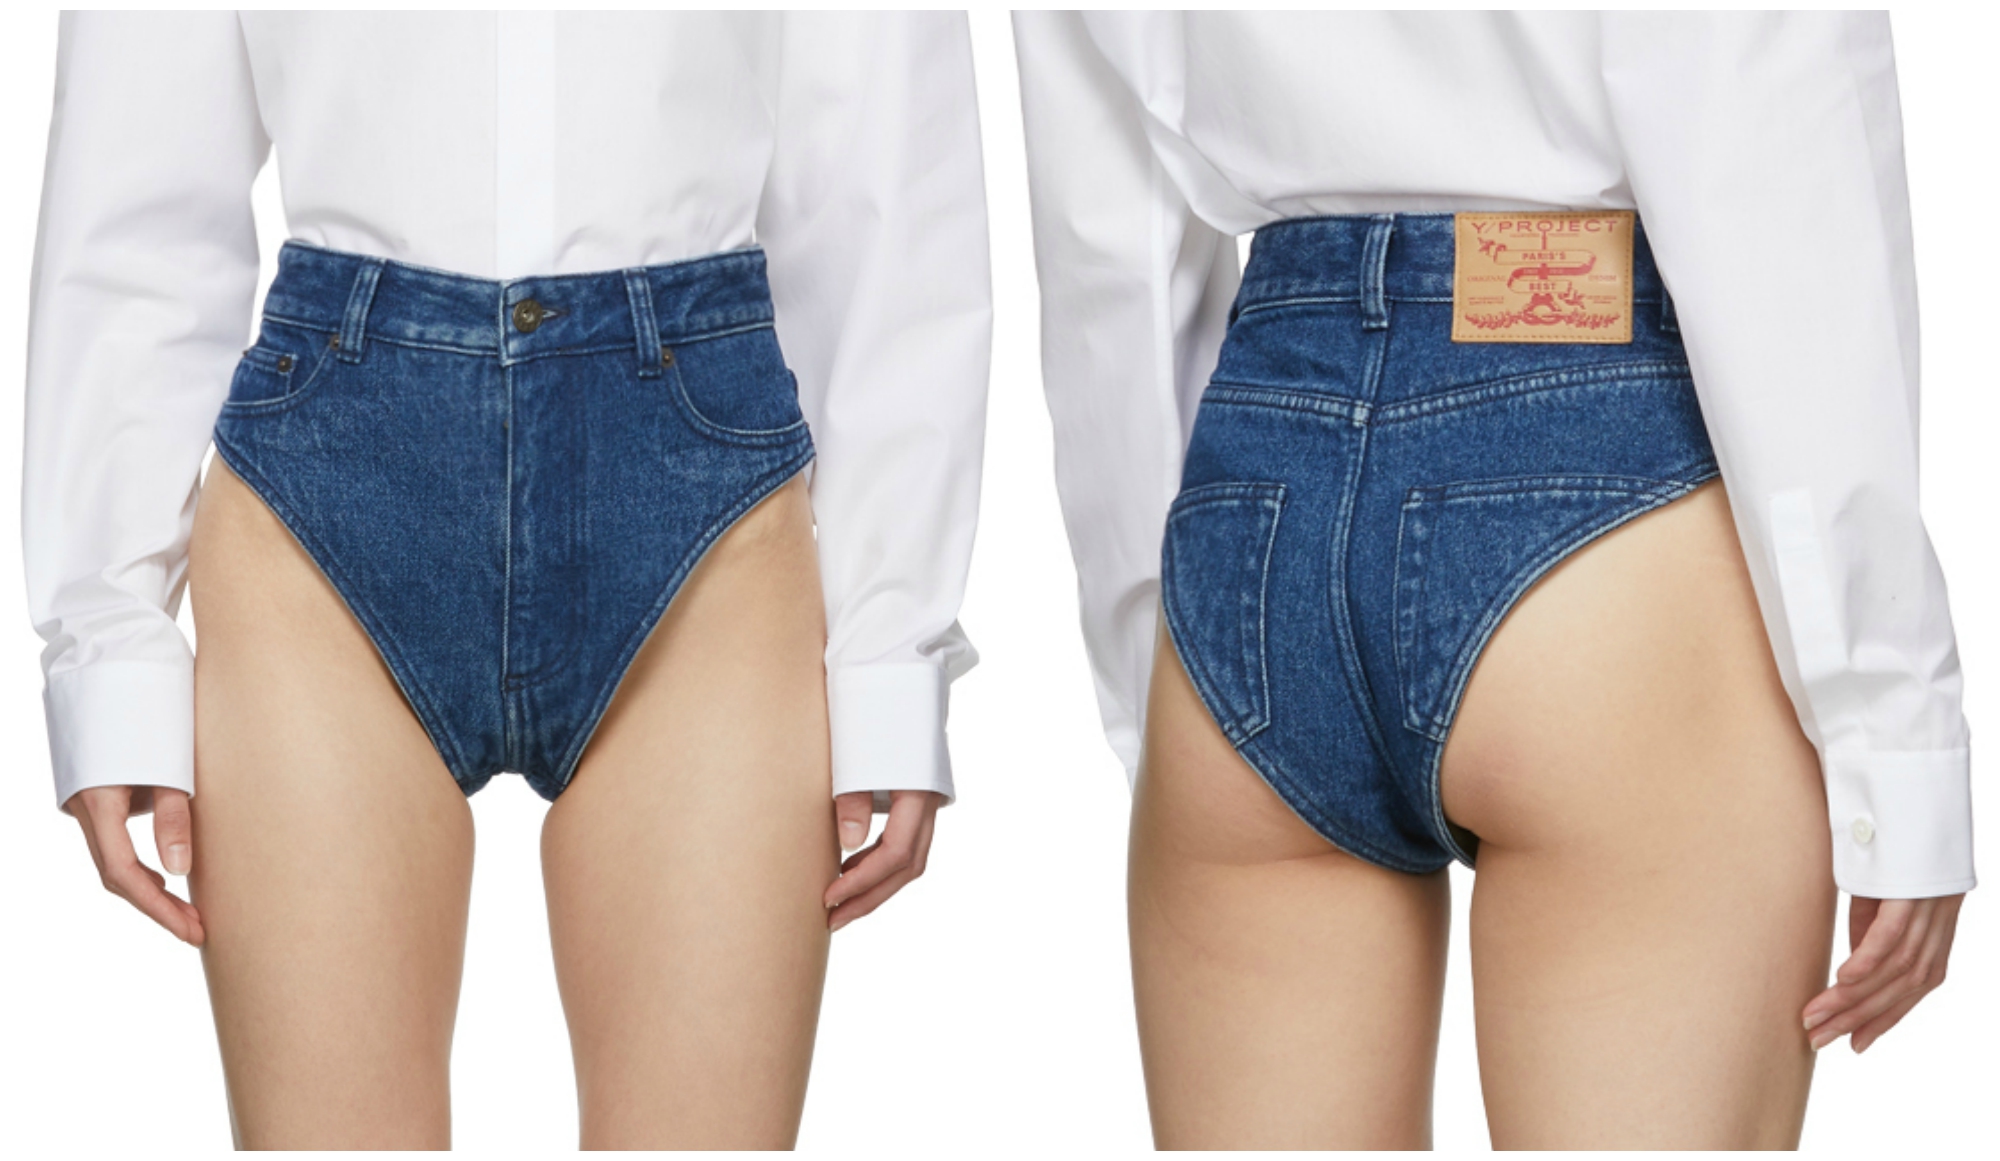 Uanset hvilken Reception Manifest These $315 Jean Panties Are Driving The Internet Crazy - Maxim